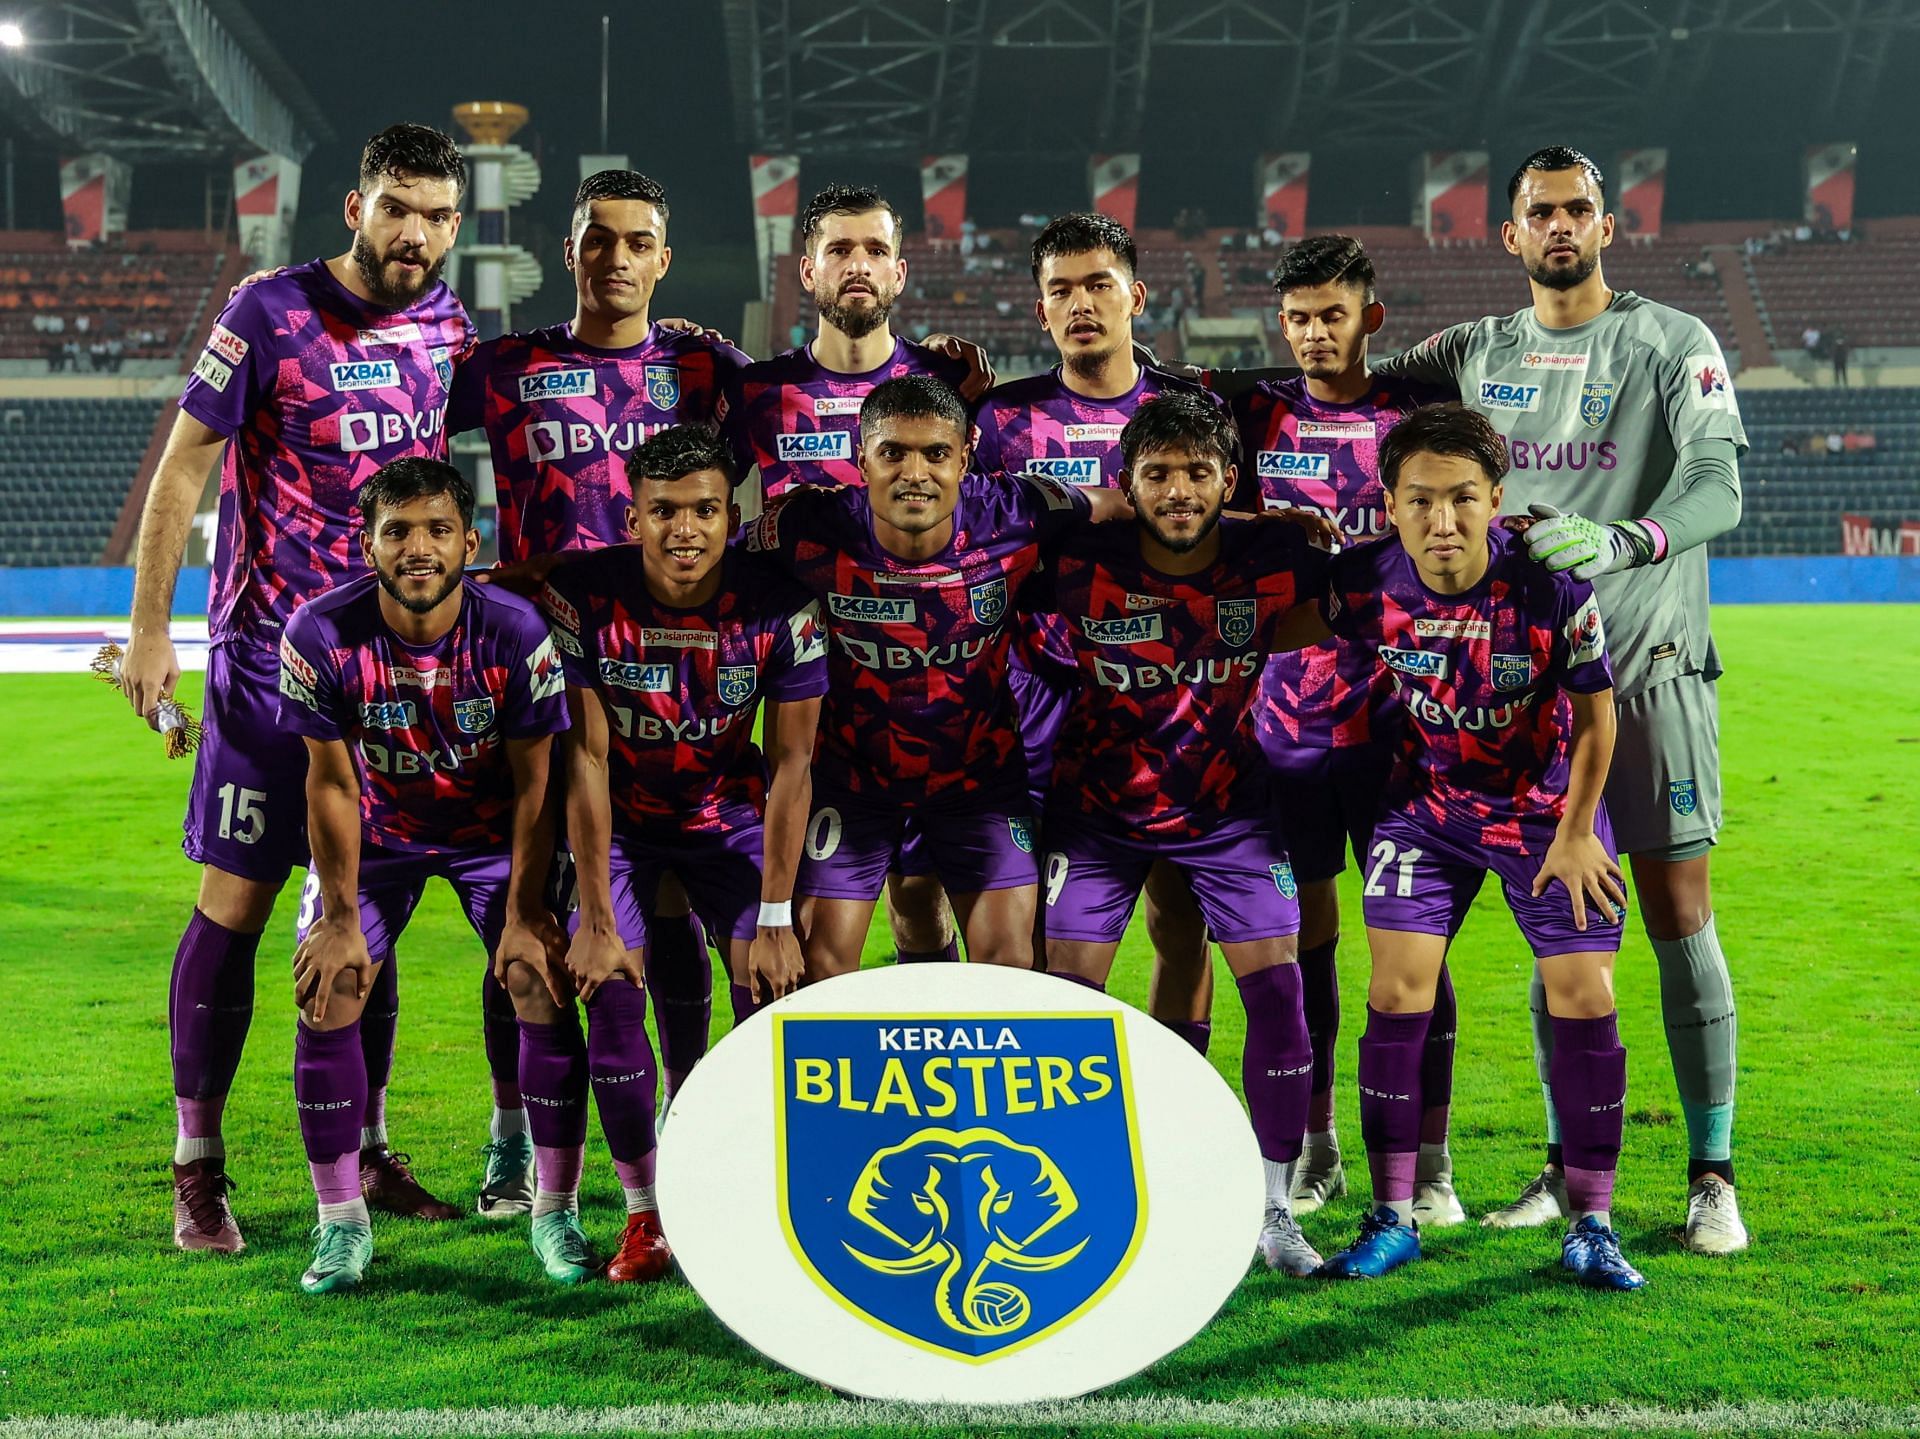 Kerala Blasters FC will need a victory to secure their fifth spot.